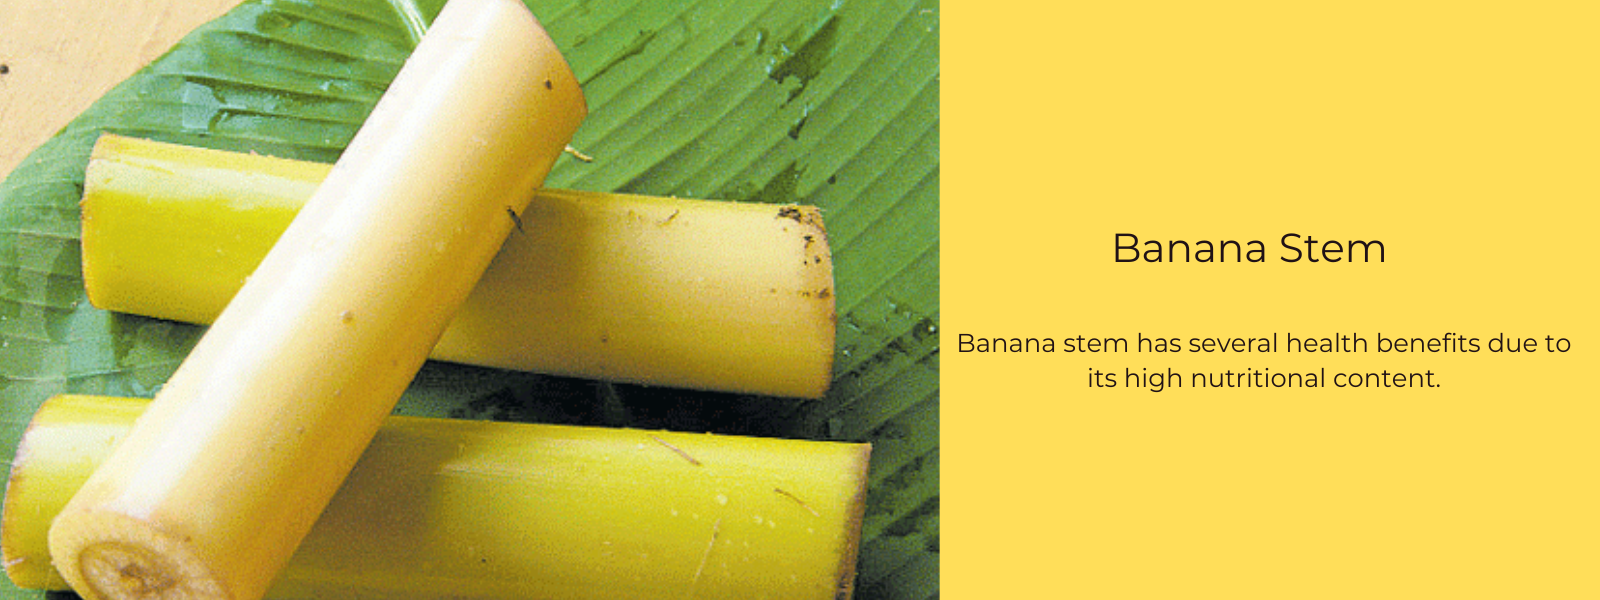 Banana Stem - Health Benefits, Uses and Important Facts